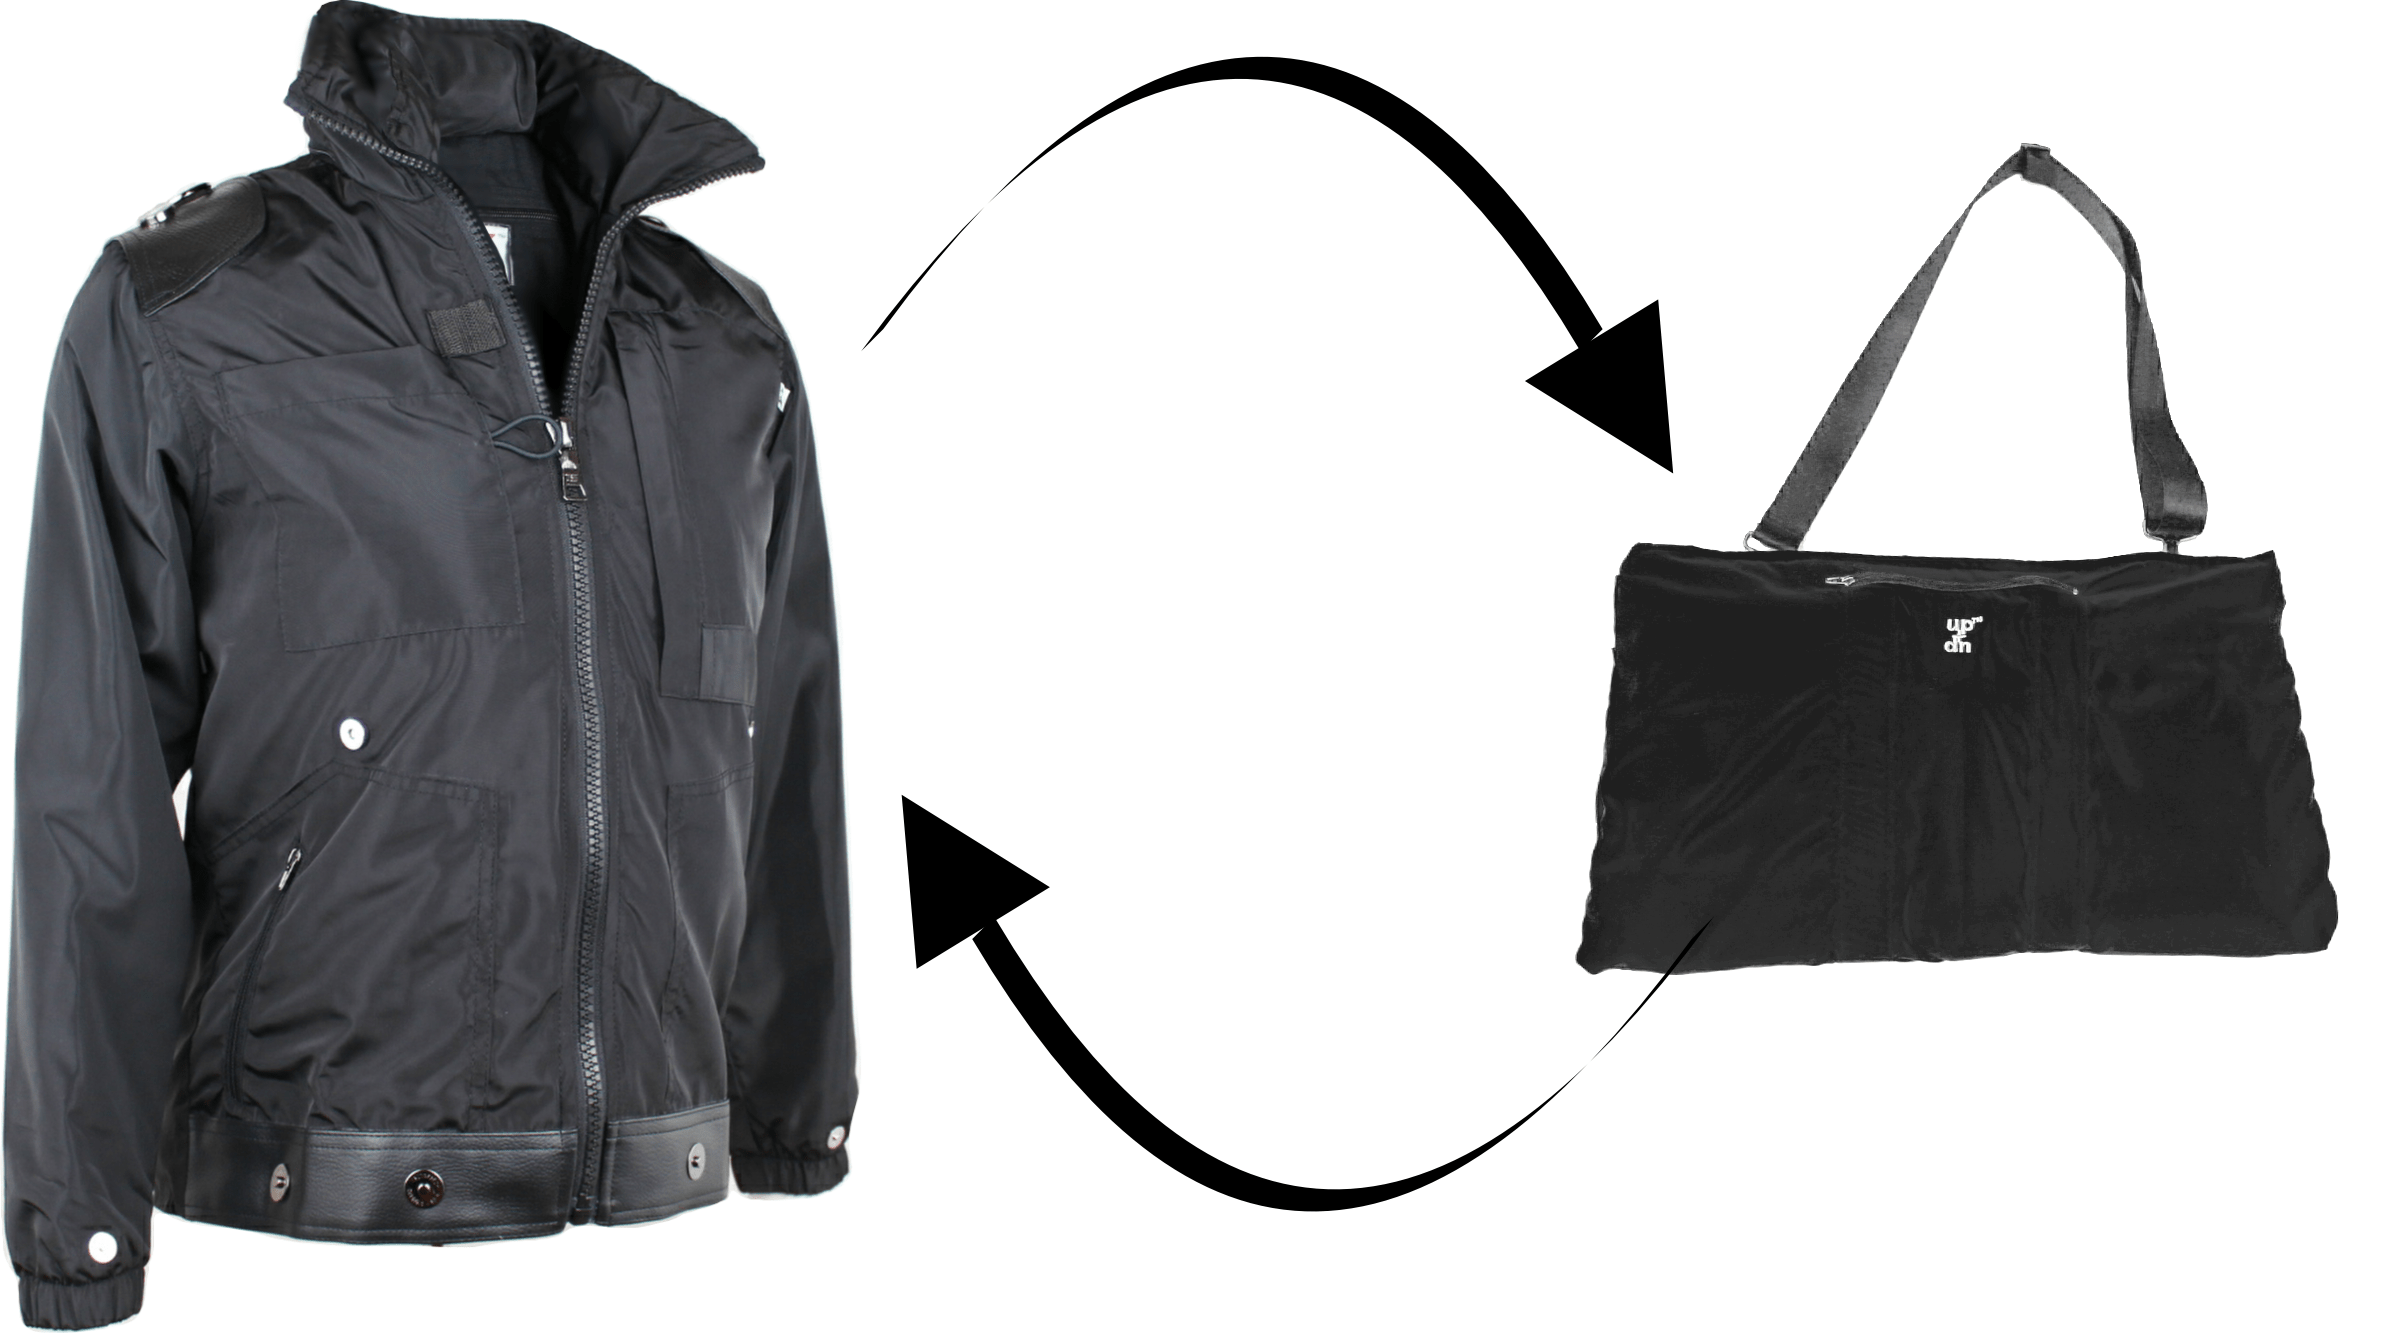 Travel Jacket that converts into a Bag, with concealed pockets. T&S